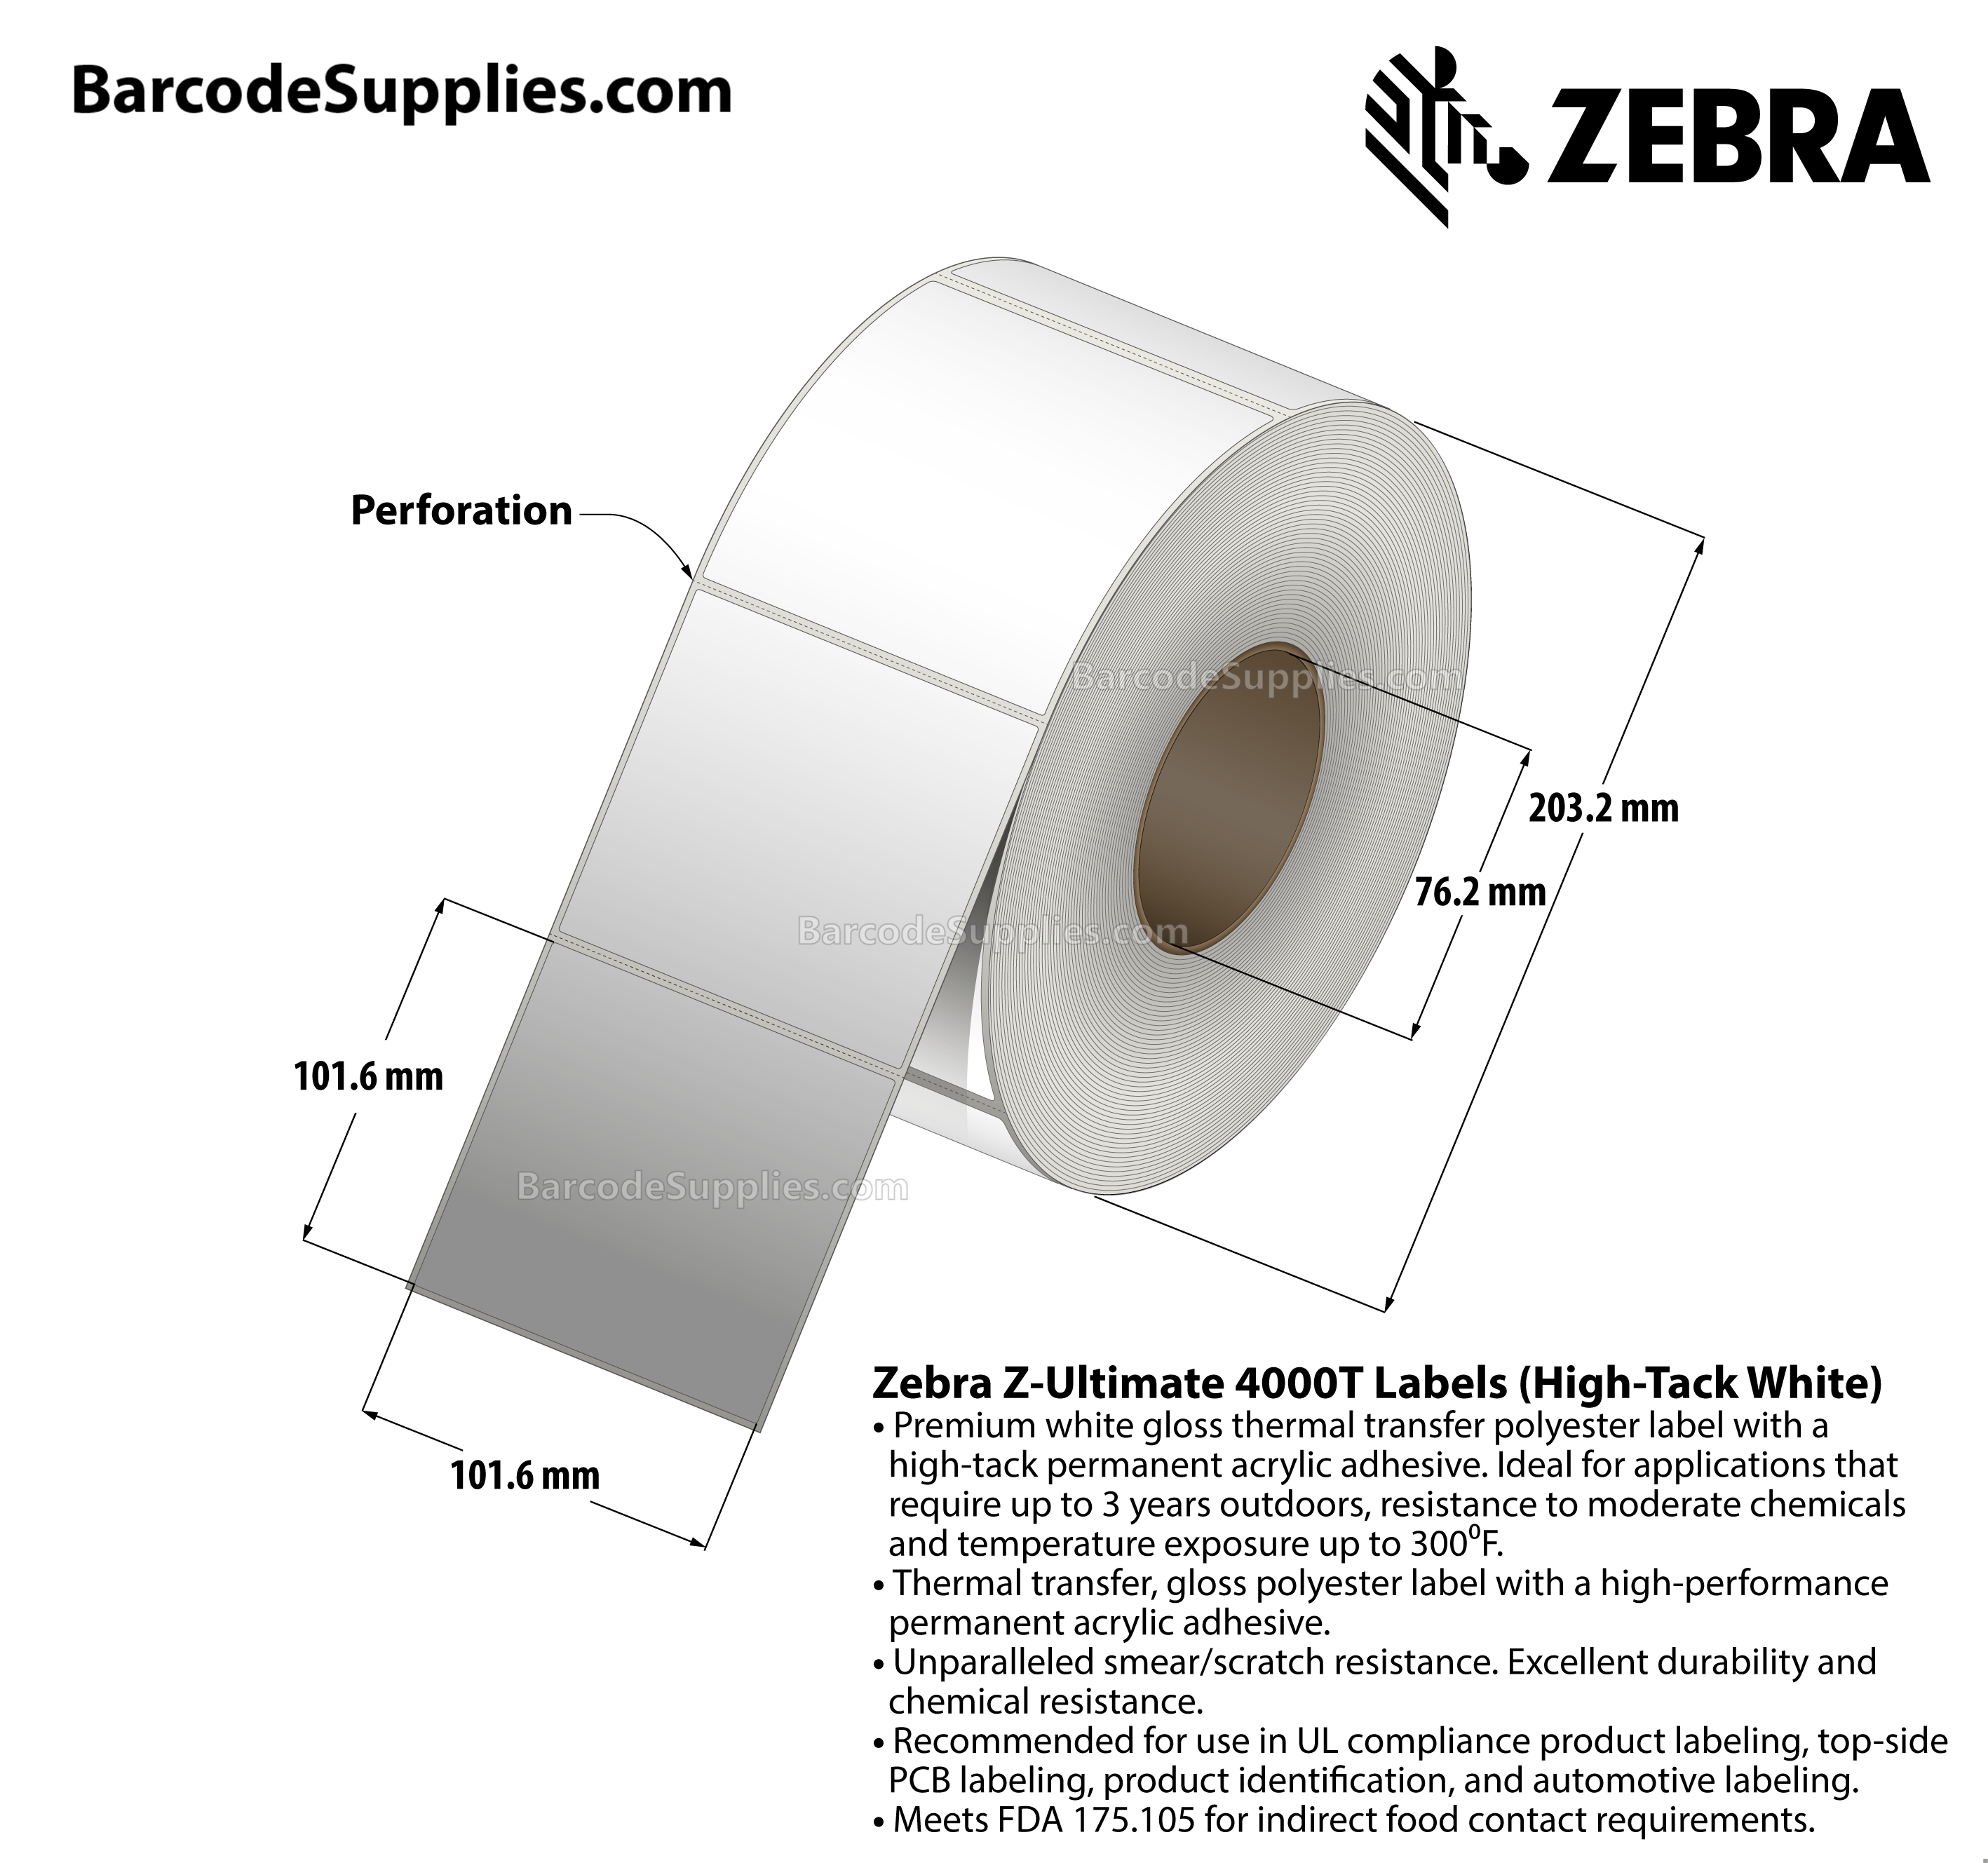 4 x 4 Thermal Transfer White Z-Ultimate 4000T High-Tack White Labels With High-tack Adhesive - Perforated - 1000 Labels Per Roll - Carton Of 1 Rolls - 1000 Labels Total - MPN: 10023062